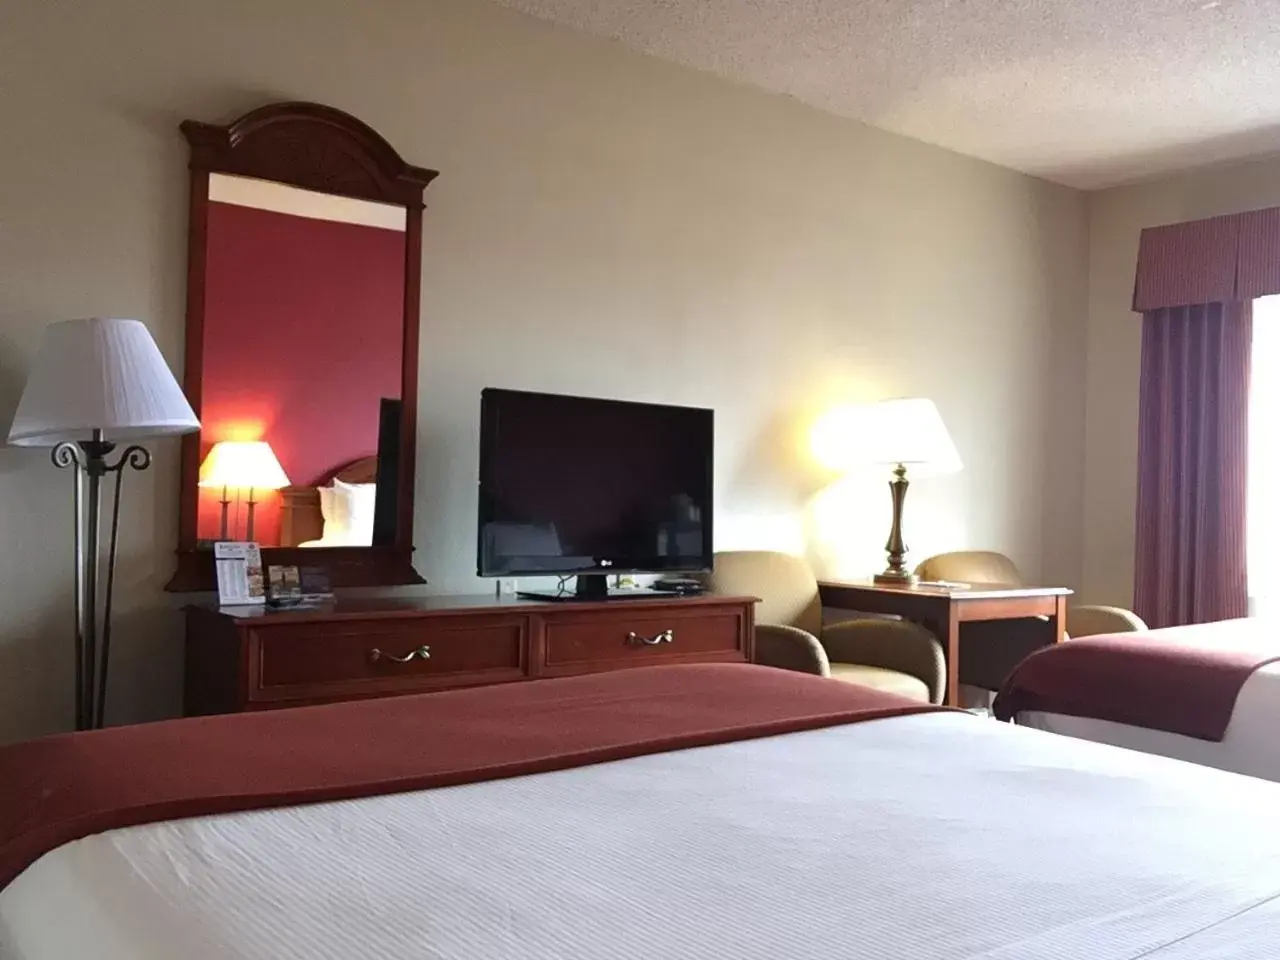 Day, Room Photo in Baymont Inn & Suites by Wyndham Holbrook